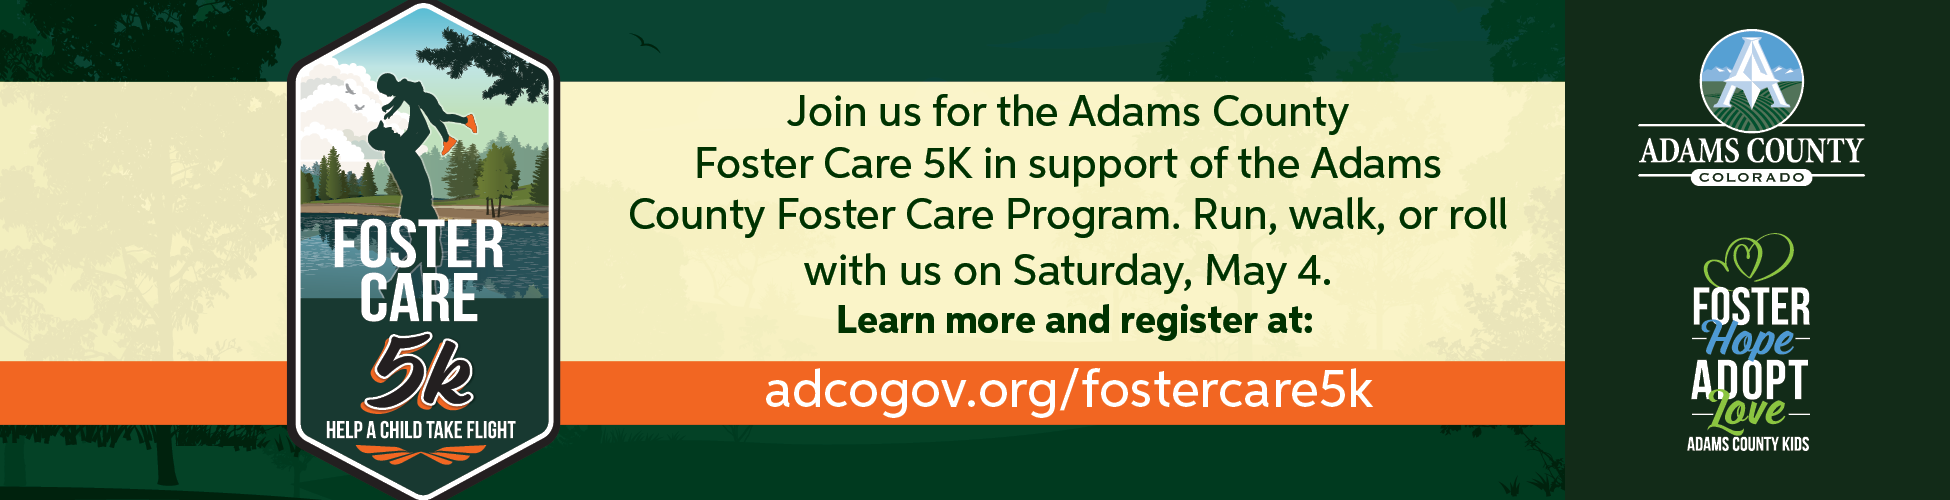 Foster Care 5K